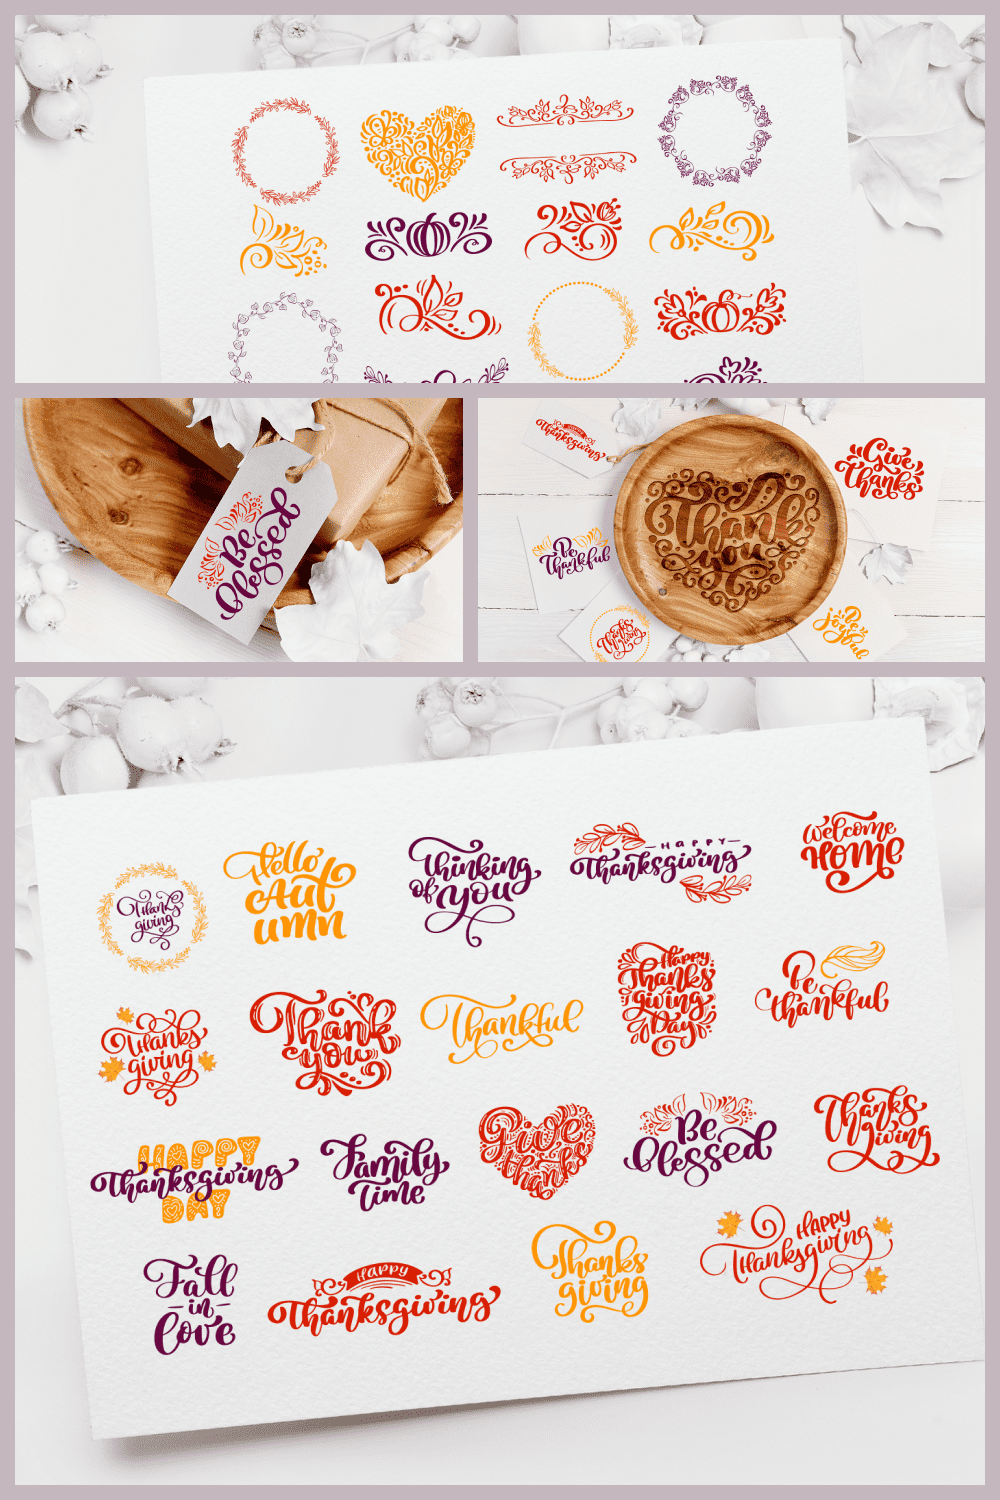 Happy Thanksgiving lettering.